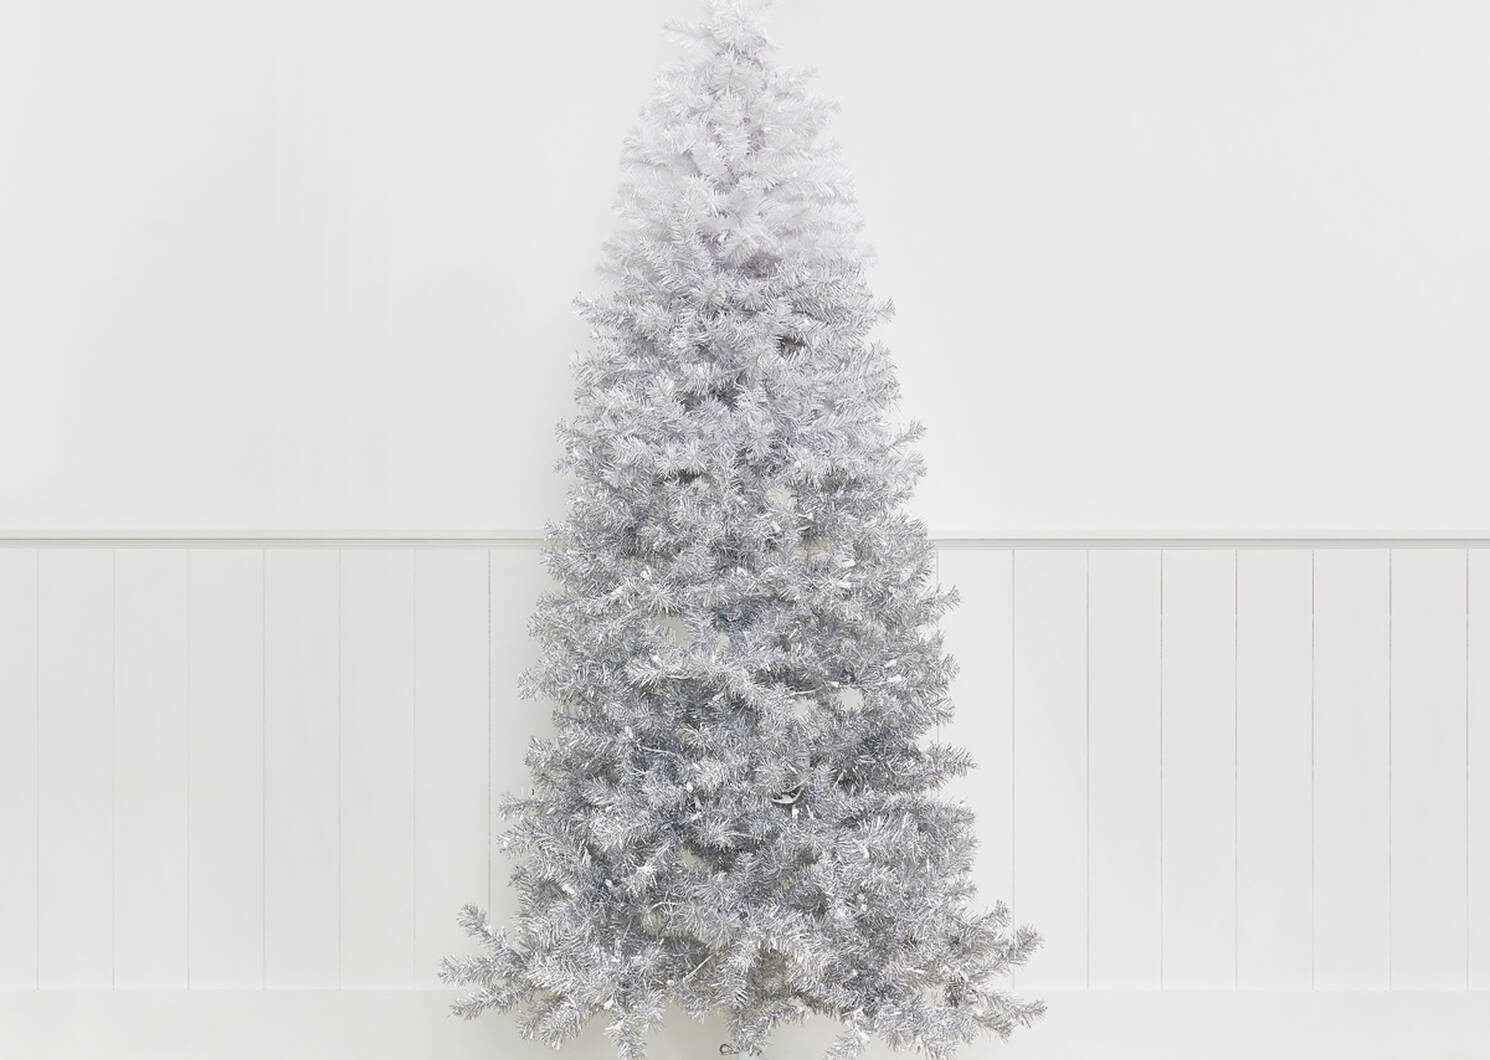 Claus Tree 7ft Pre-lit LED Ombre Grey